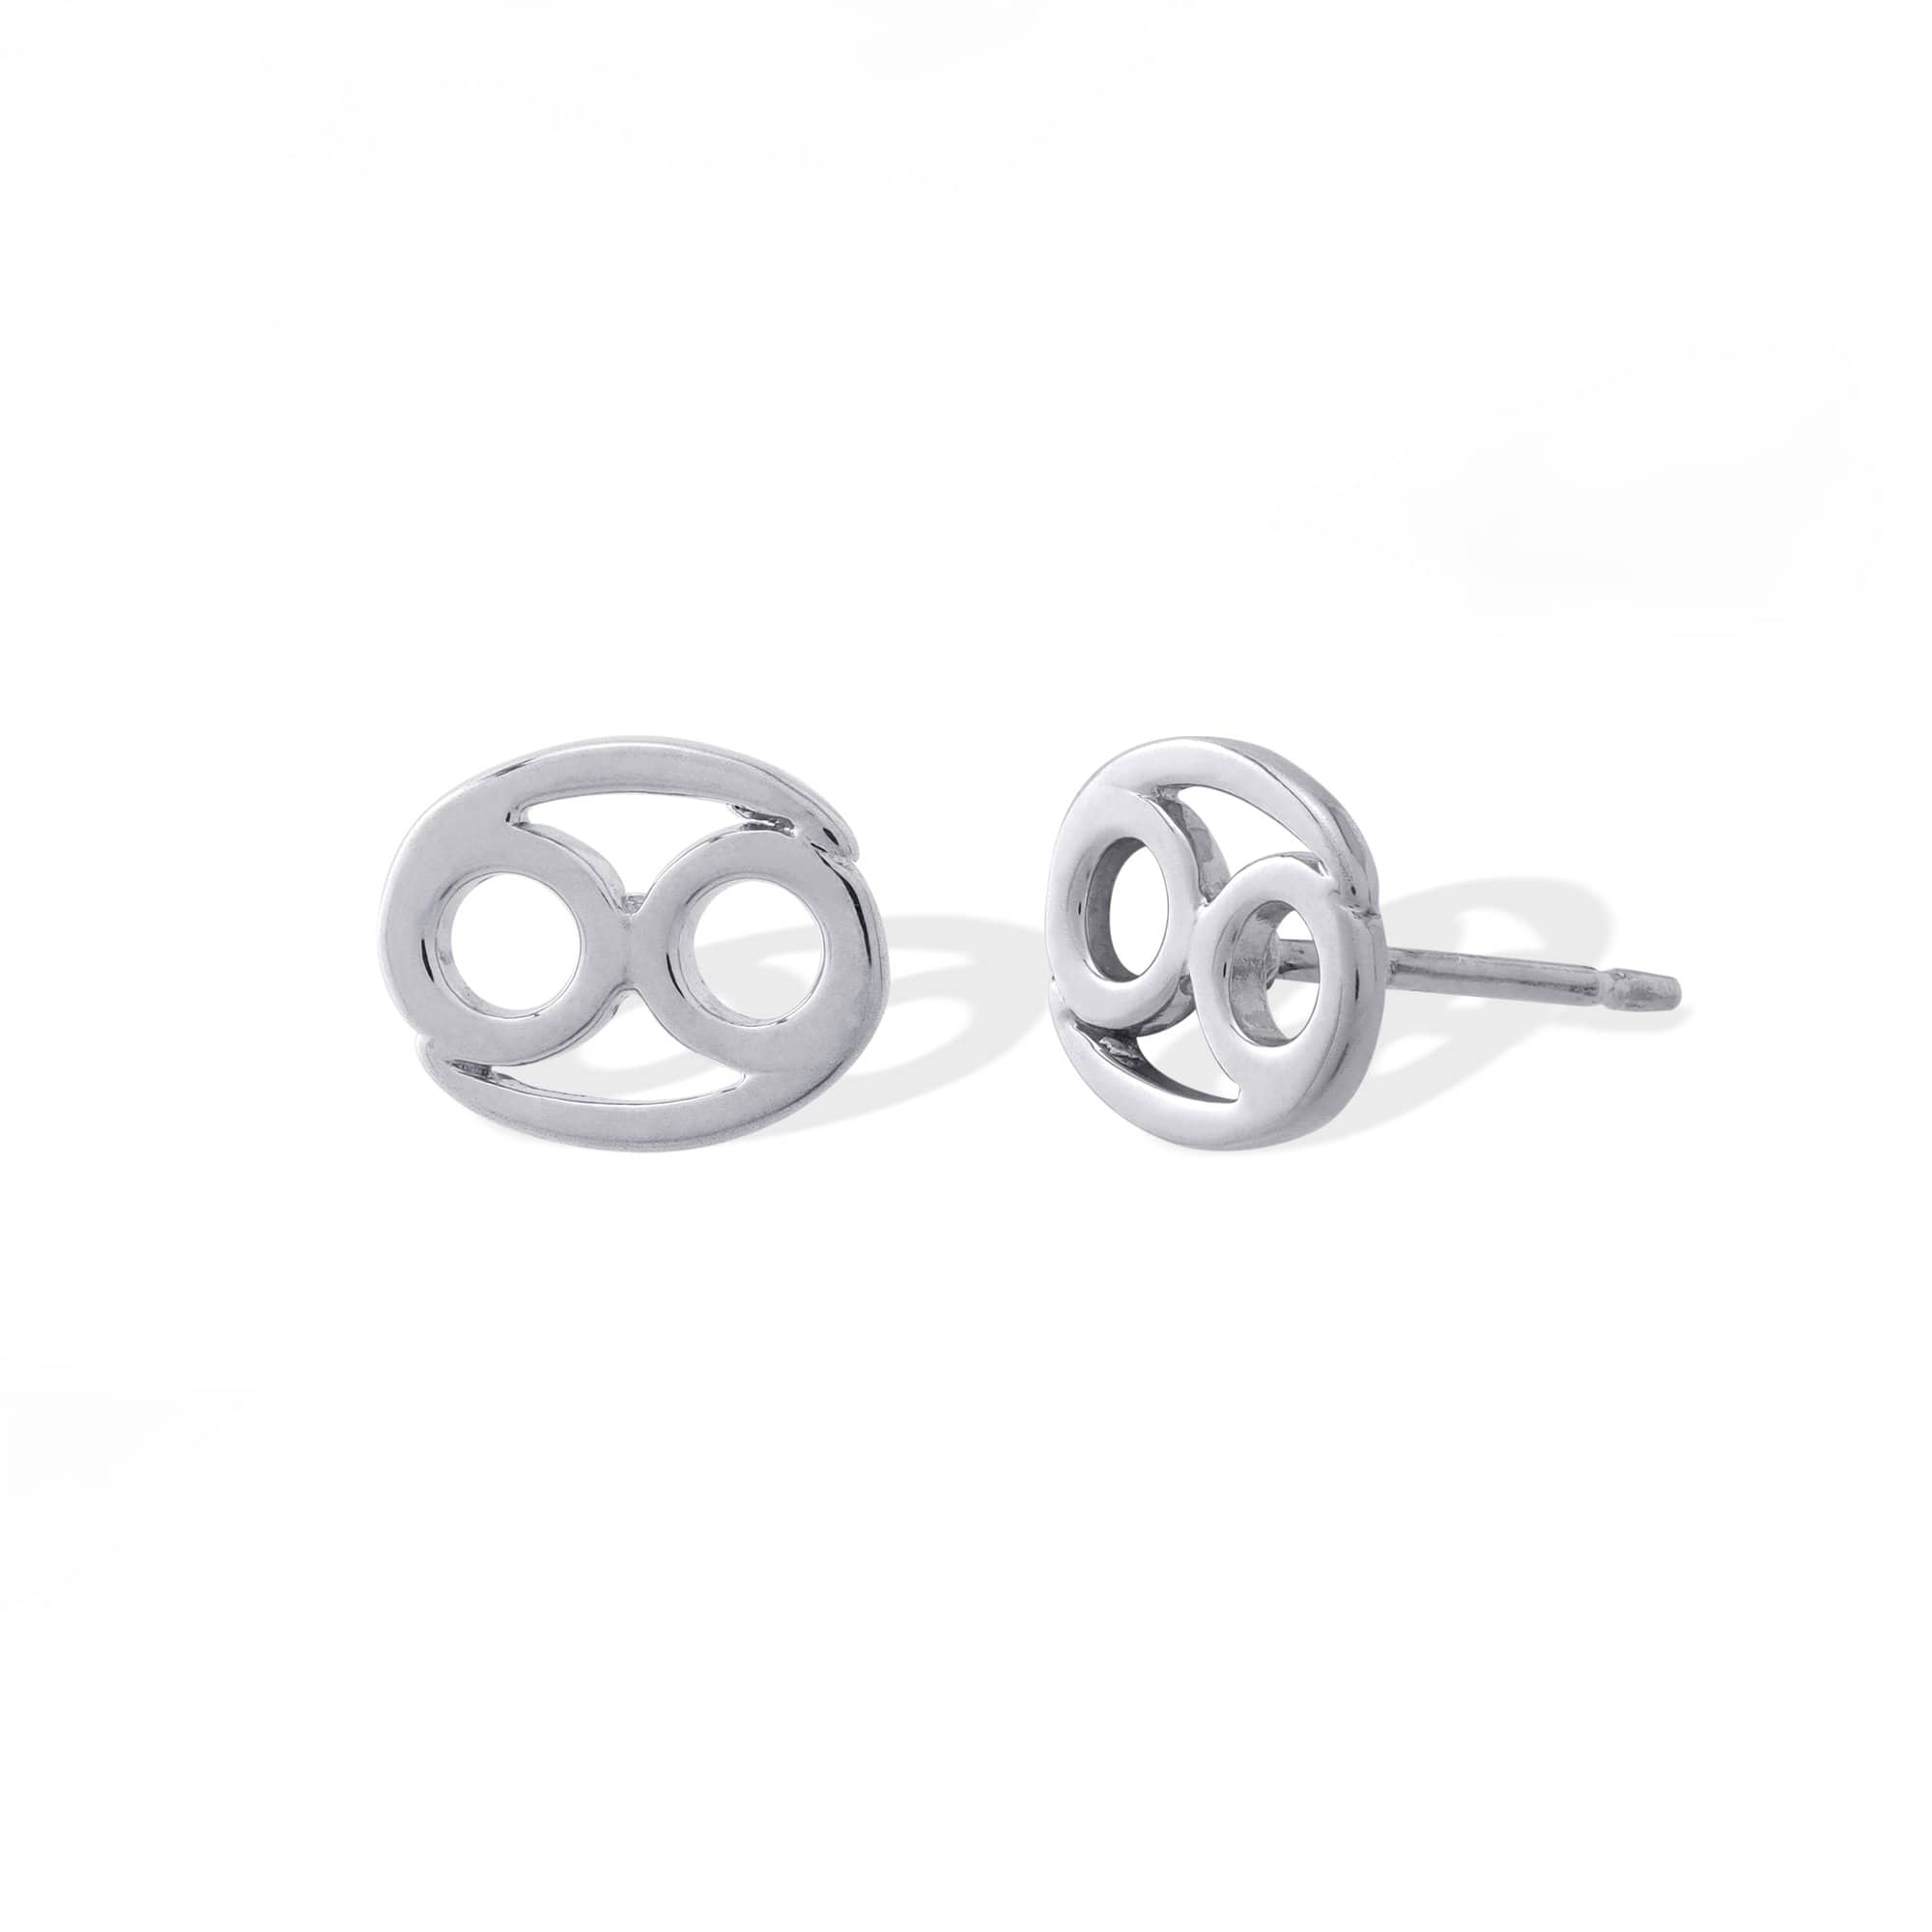 Boma Jewelry Earrings Sterling Silver / Cancer Zodiac Studs